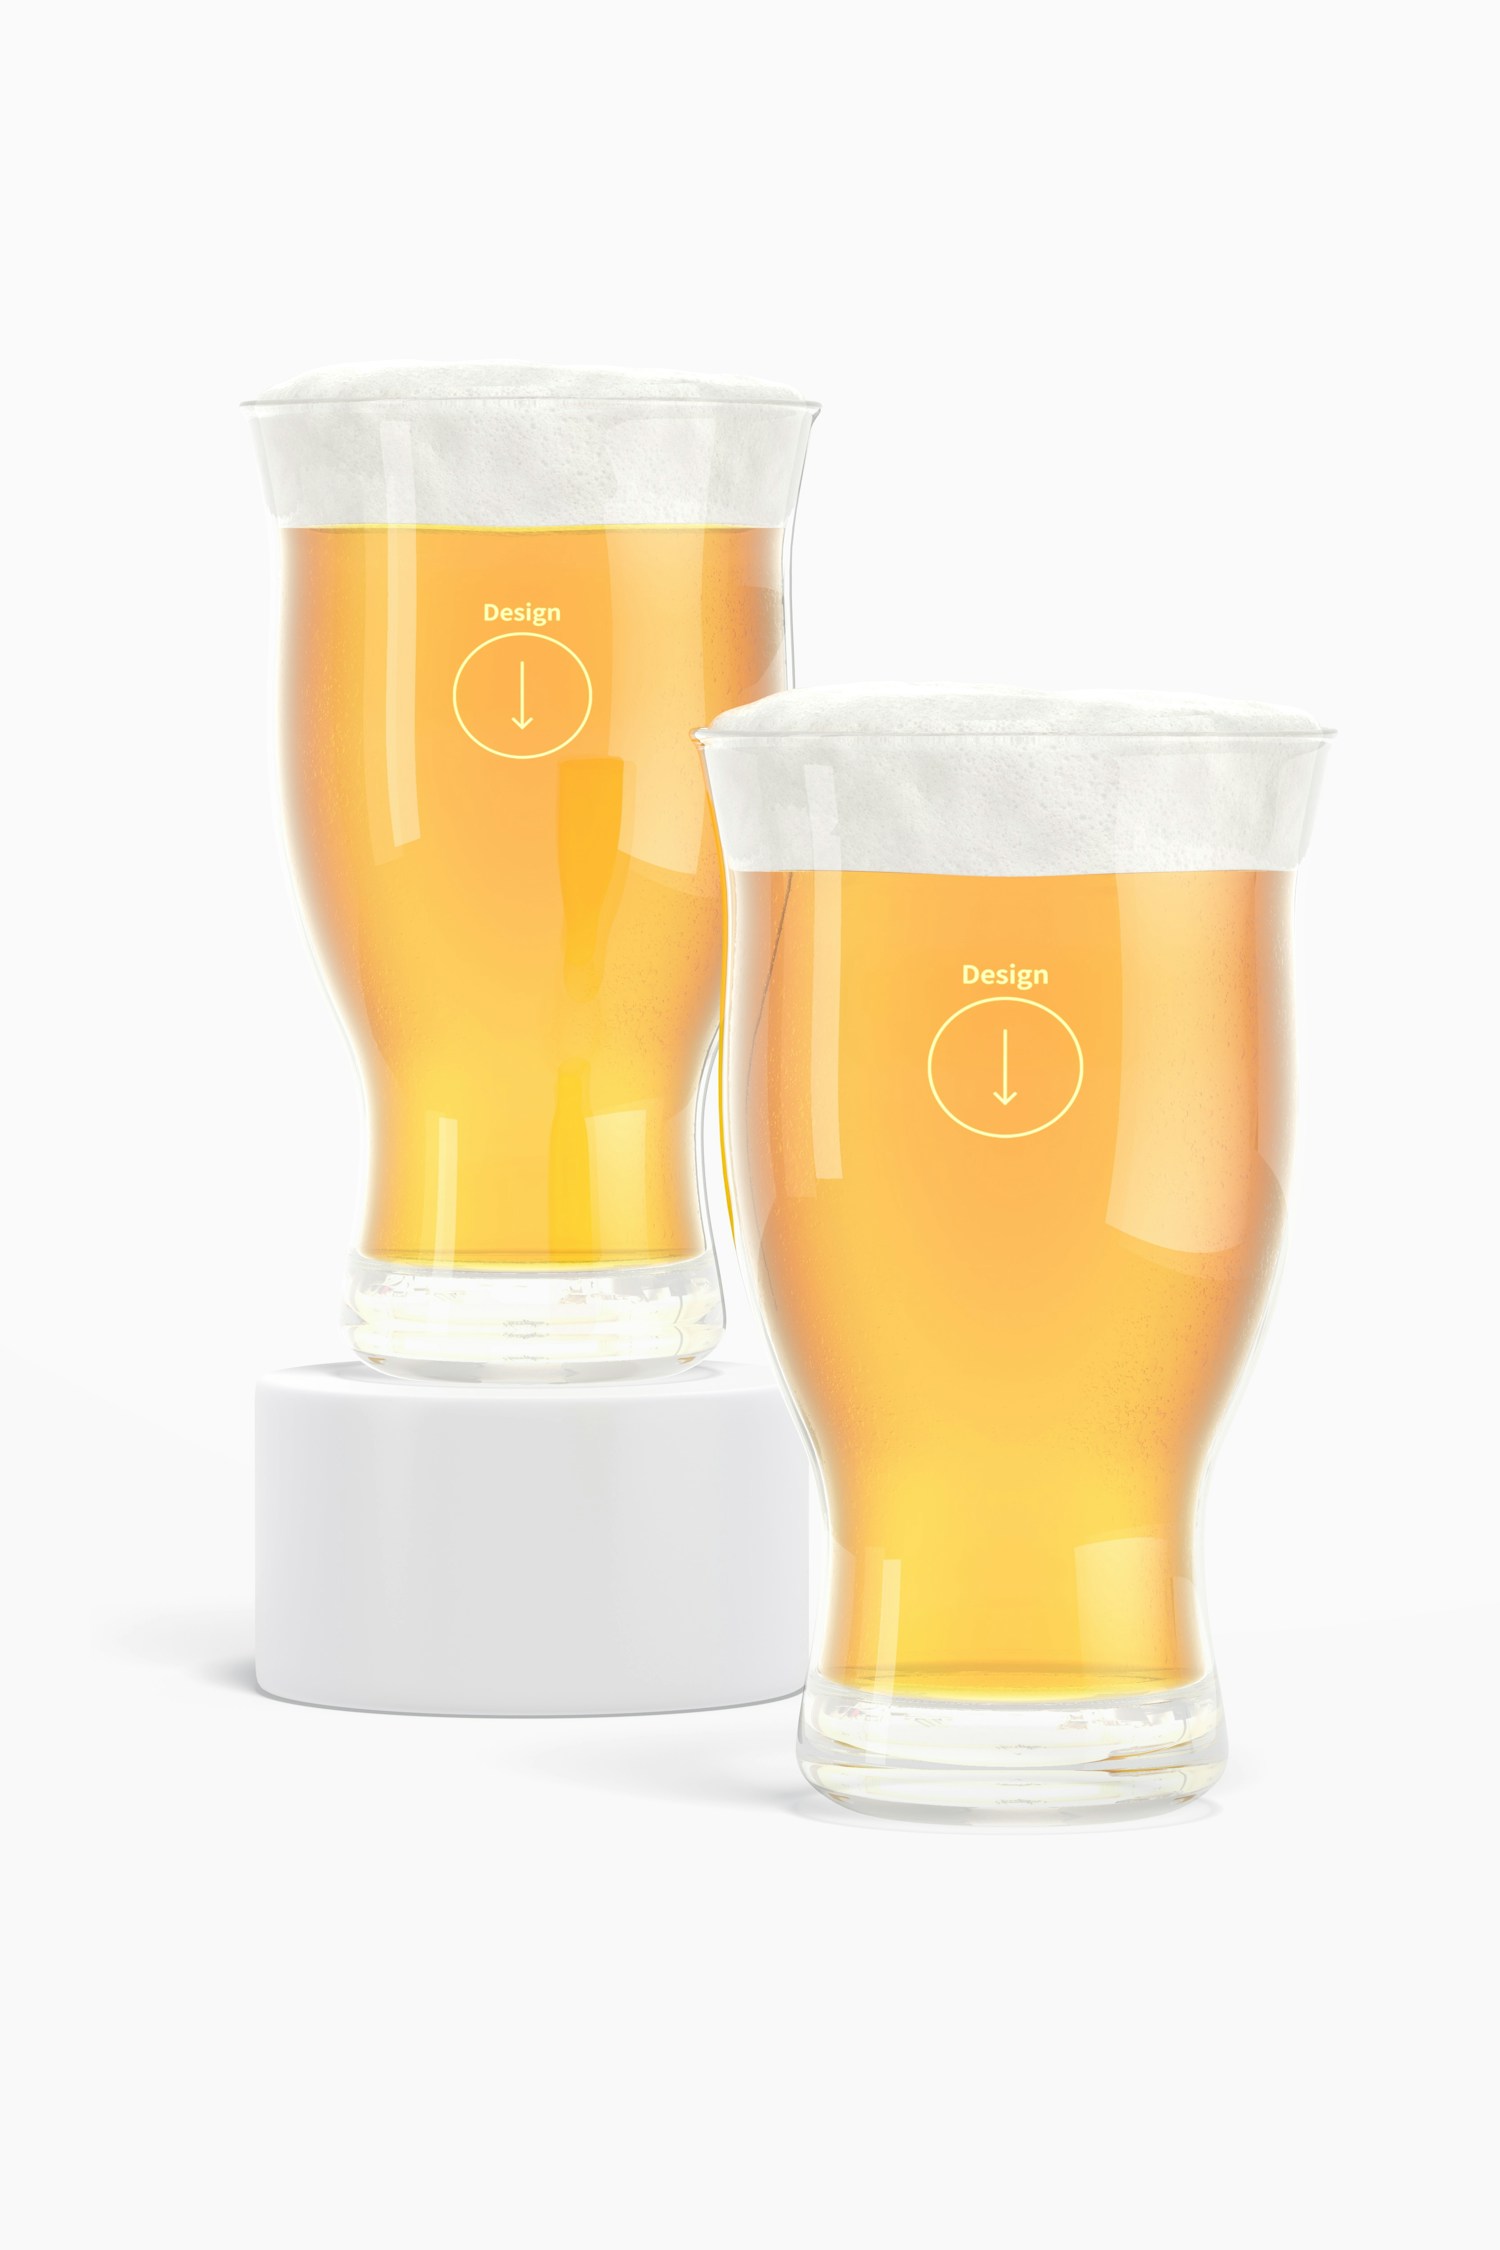 16 oz Pints Beer Glass Mockup, Front View